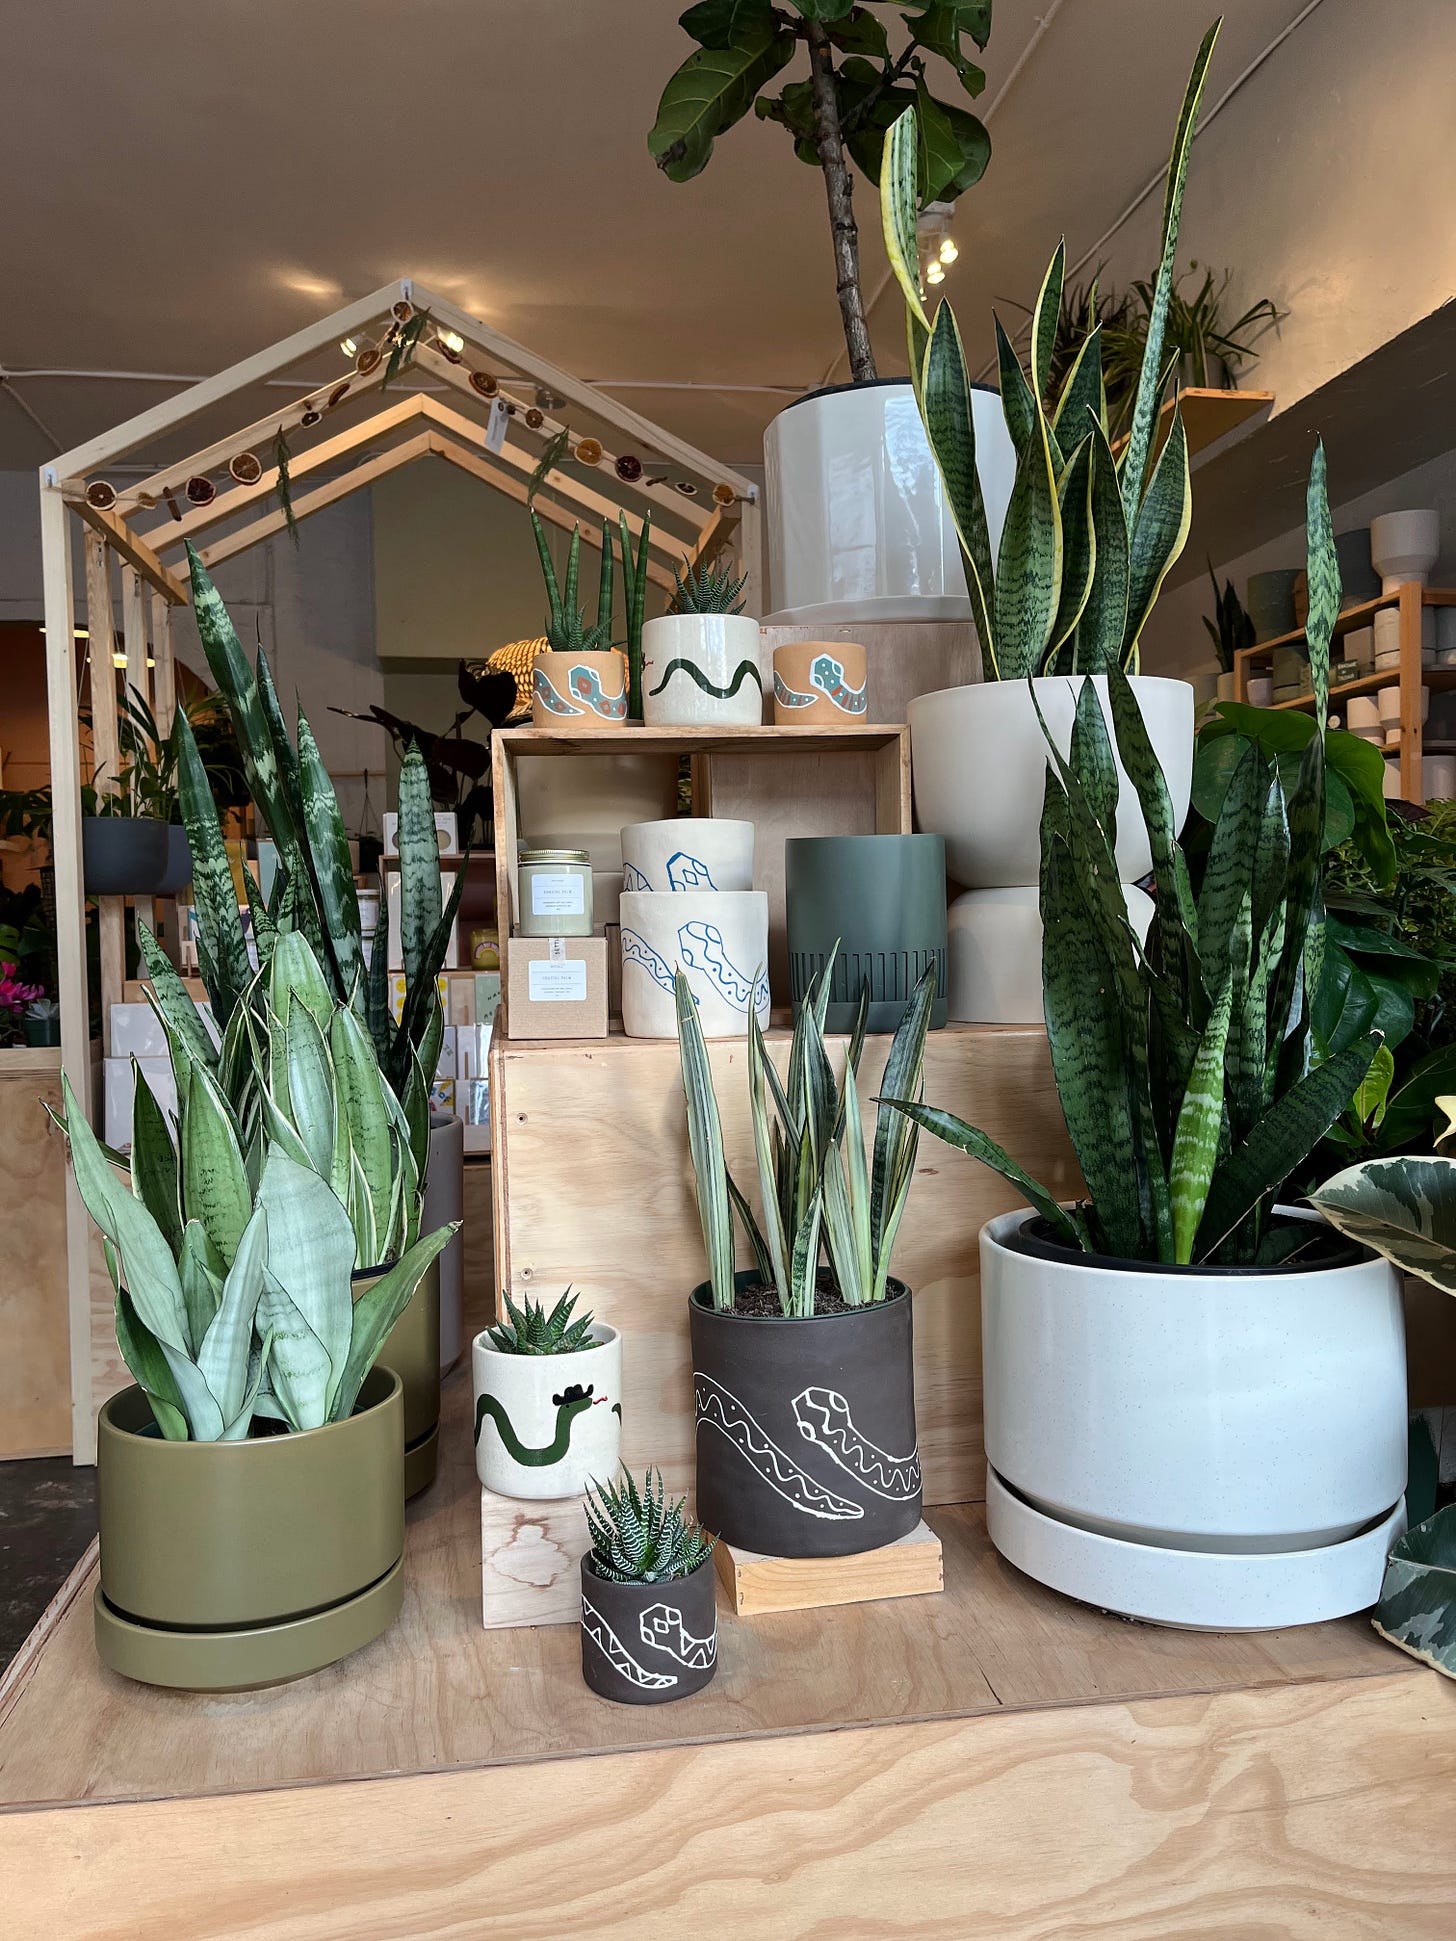 retail display with plants and pots with snake motifs